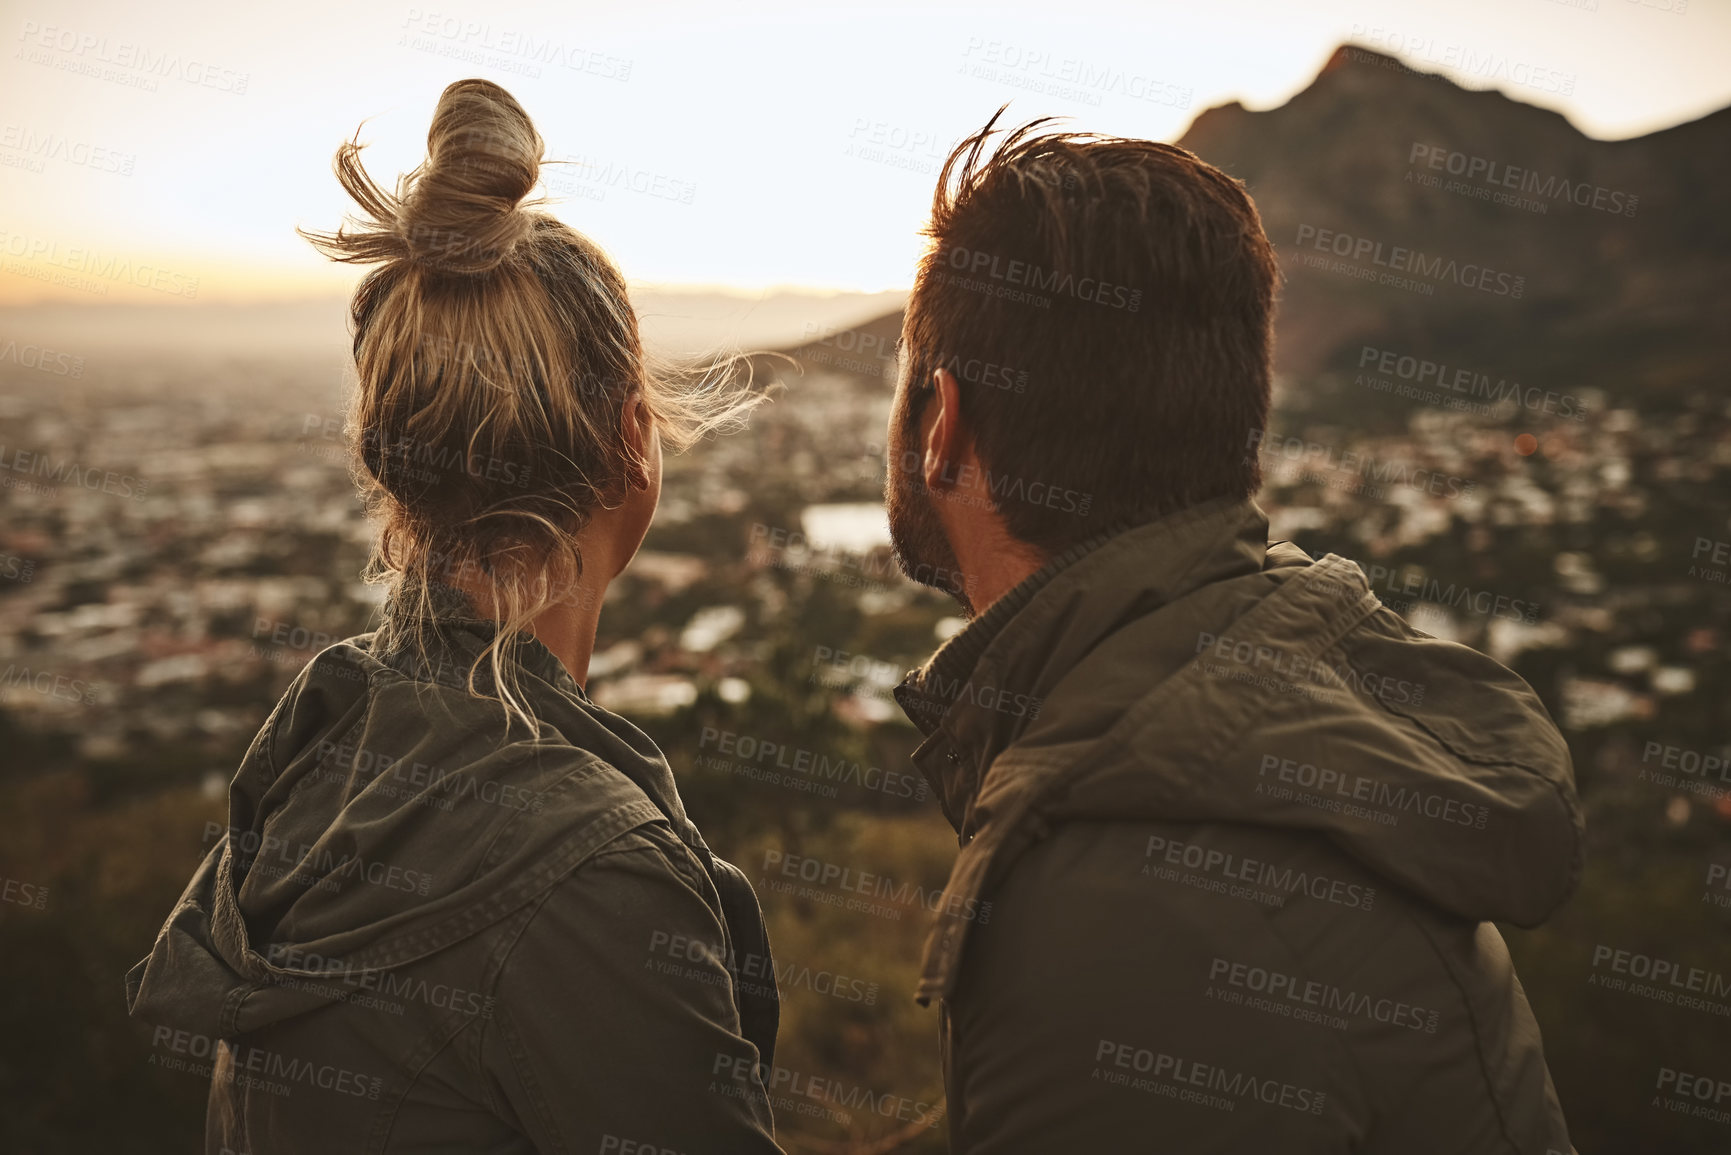 Buy stock photo Shot of a couple sitting on a mountain top